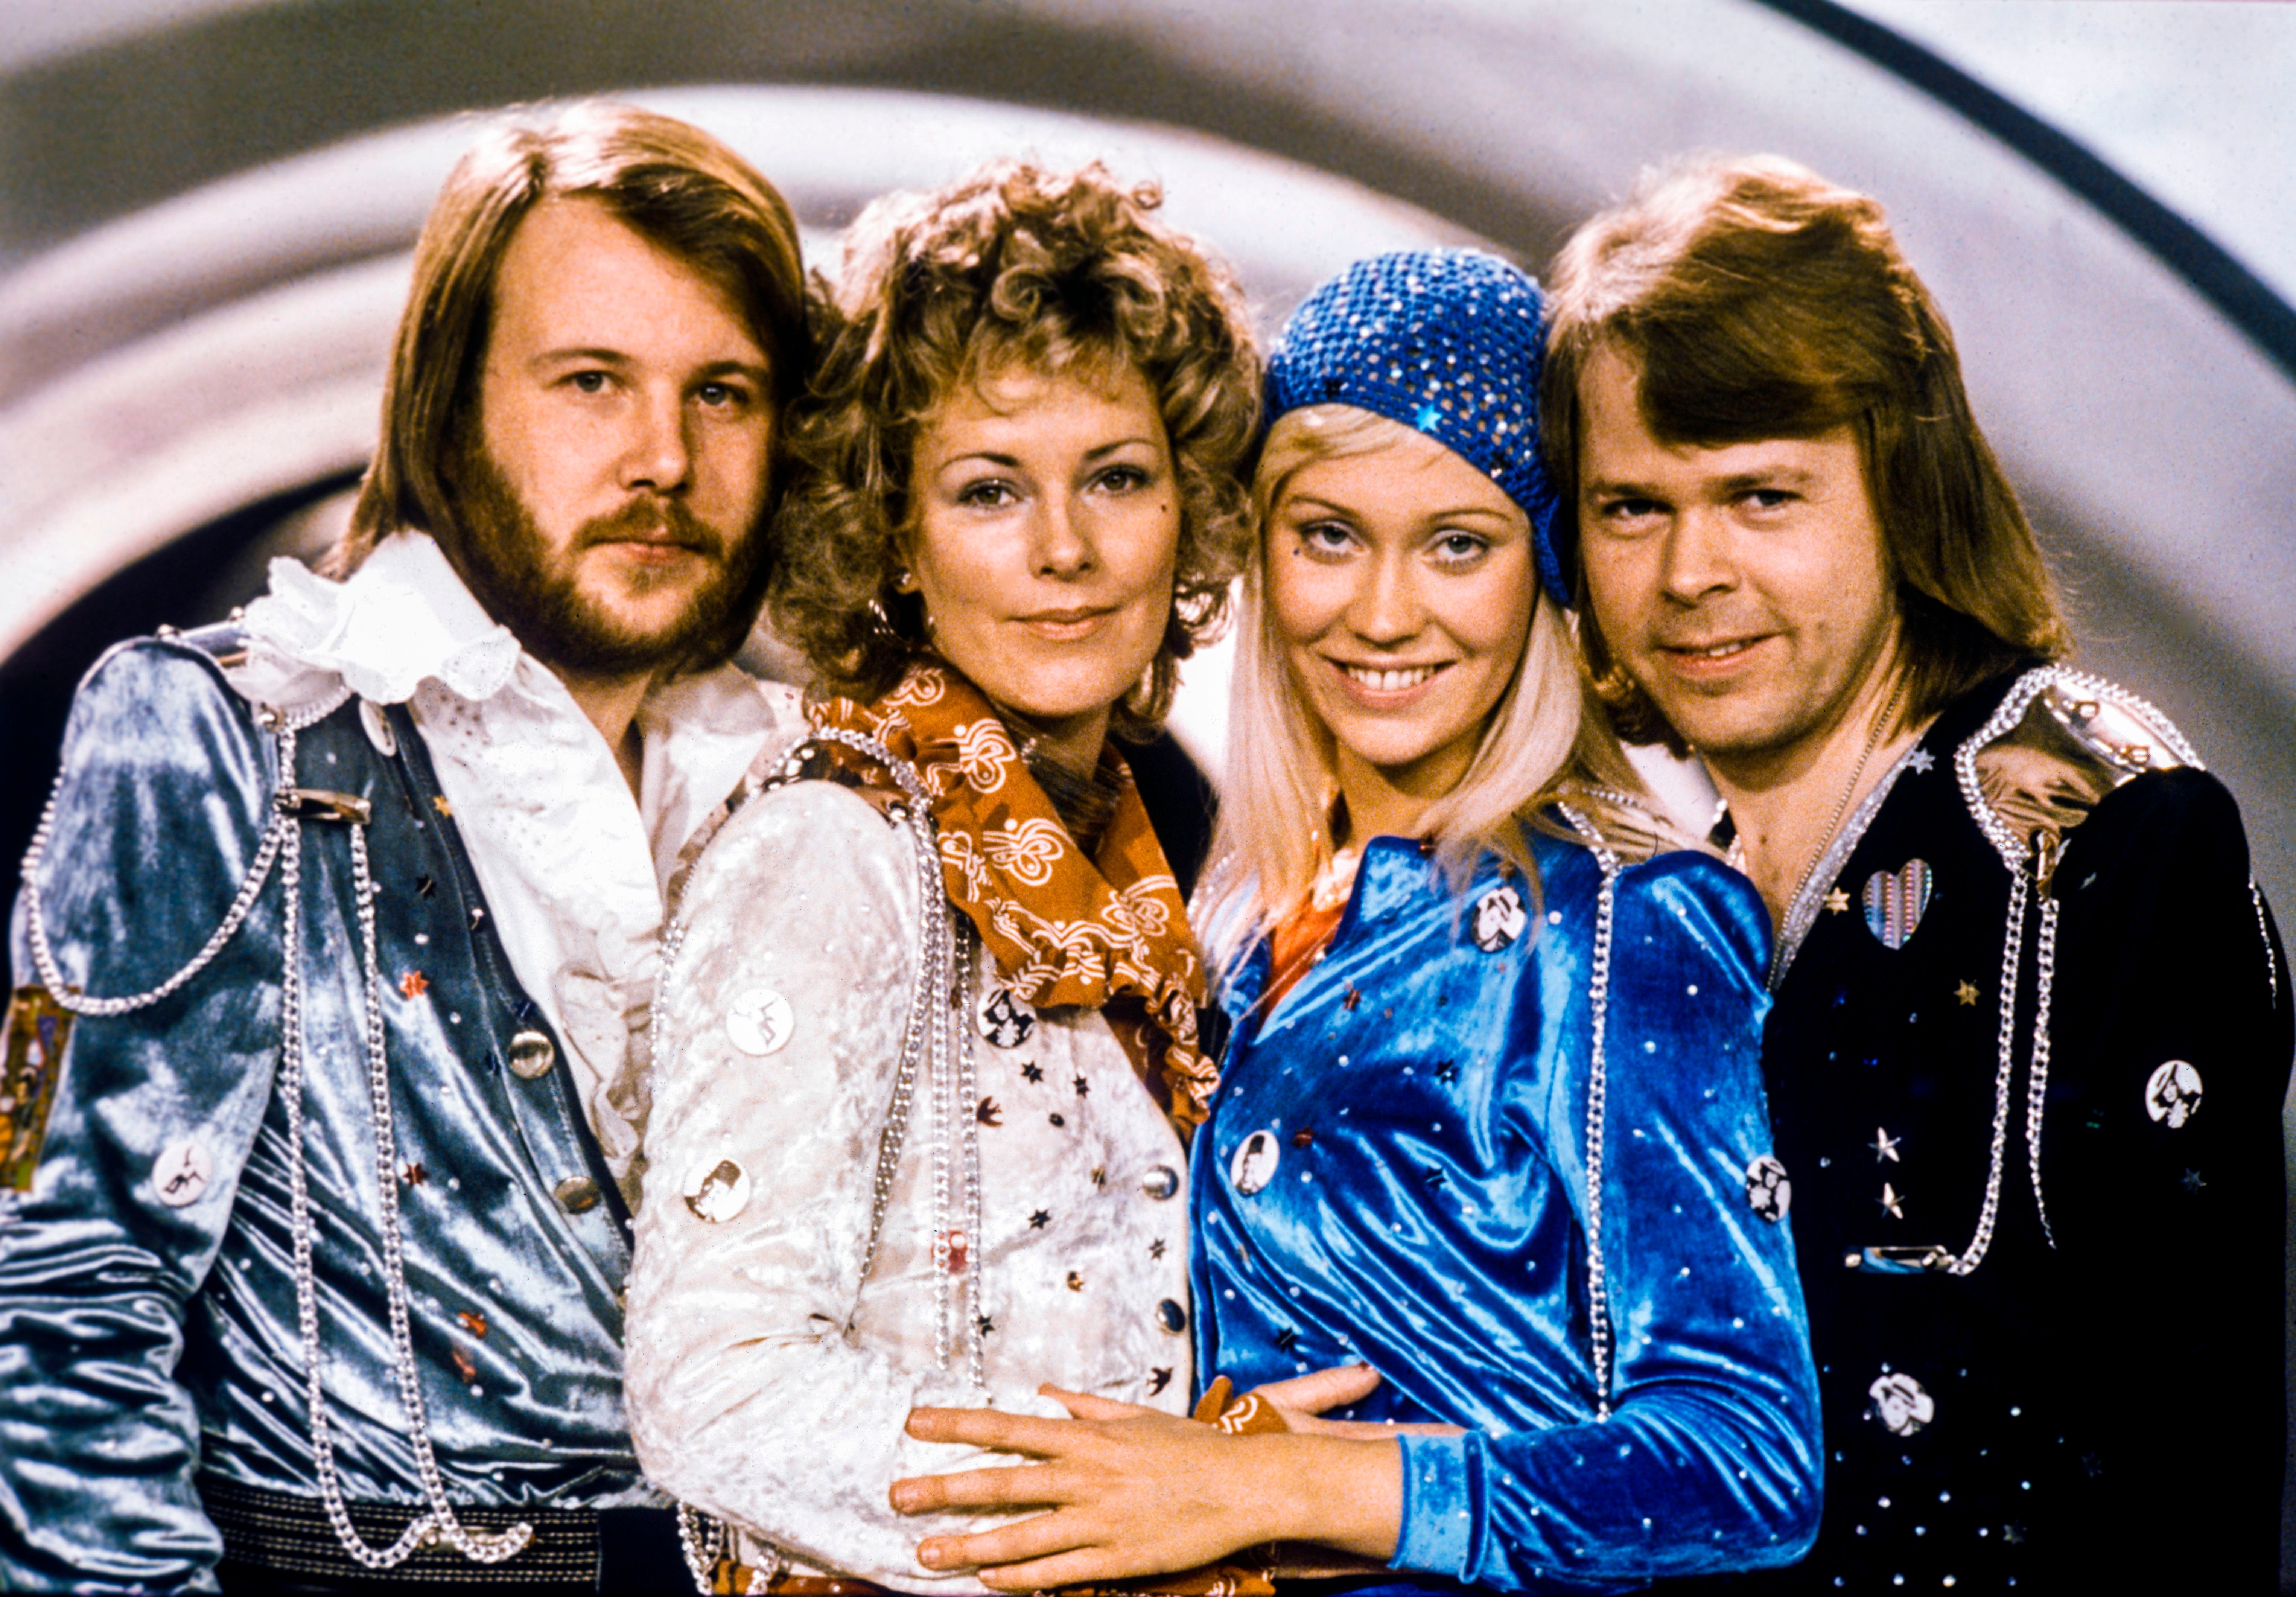 Abba, who won the Eurovision Song Contest in 1974 with ‘Waterloo’, look set to release new tracks